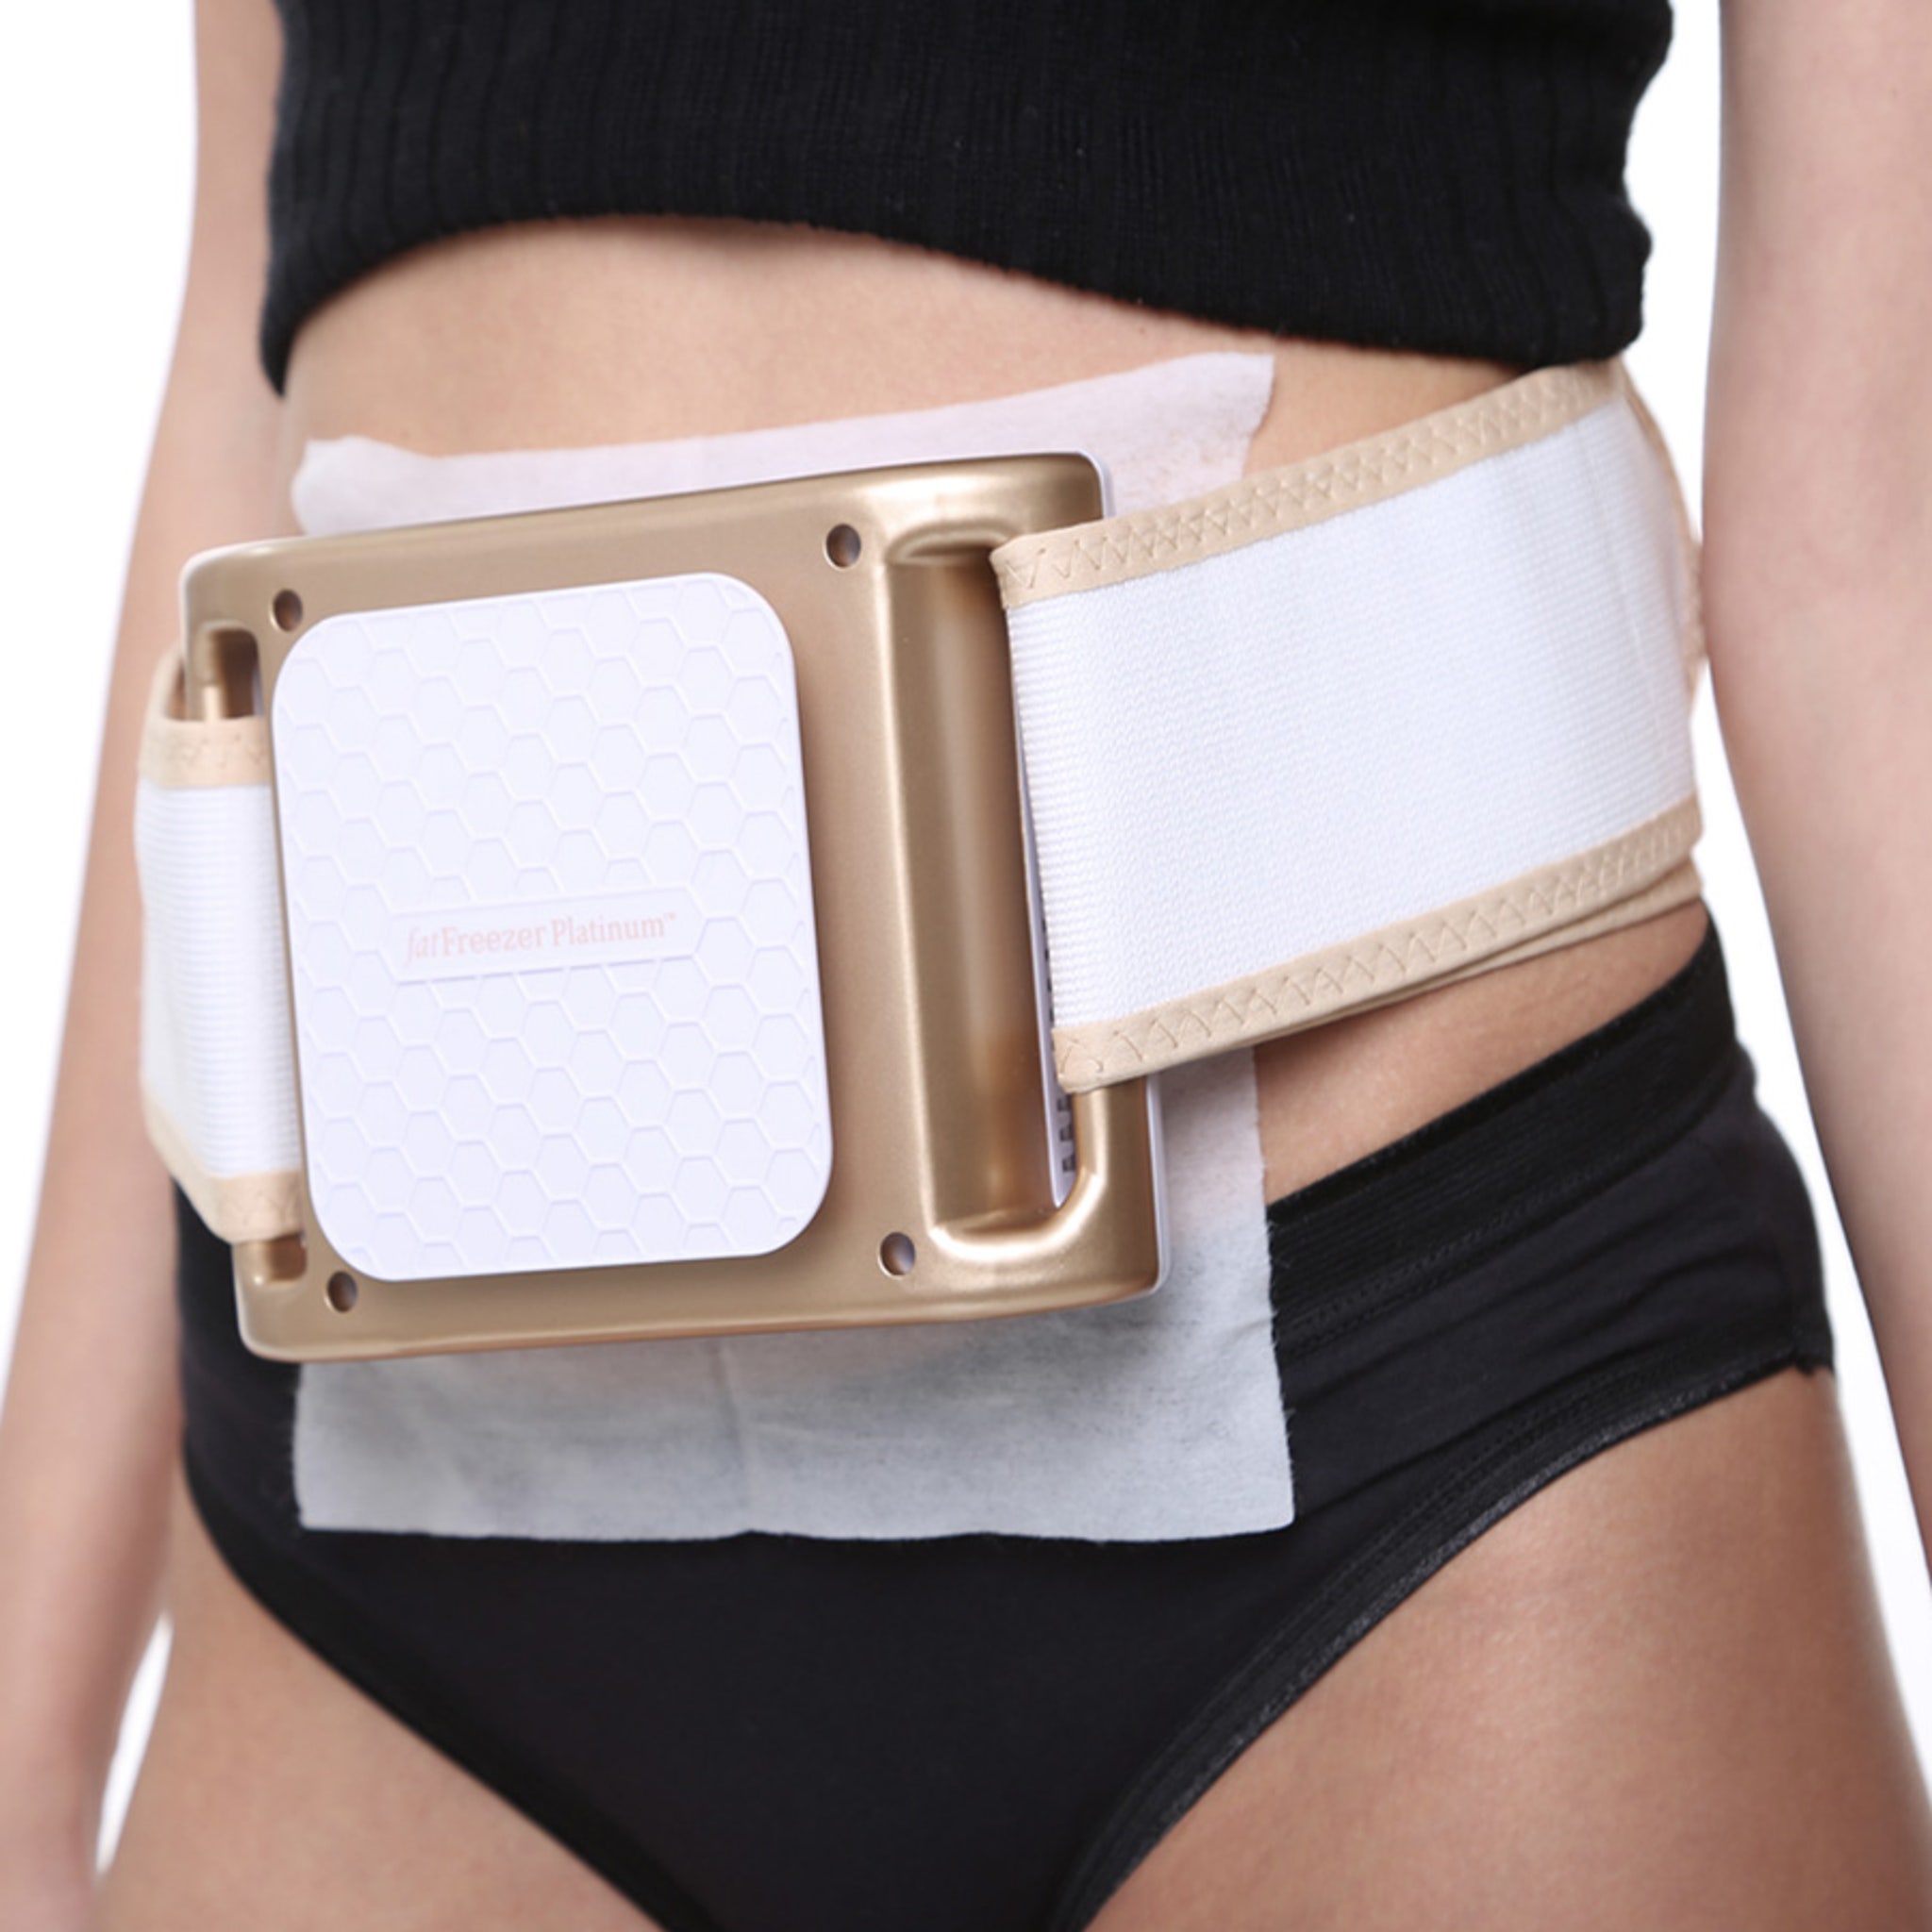 Fat Separation Sashes: The Boneless Belt Helps You be the Biggest Loser